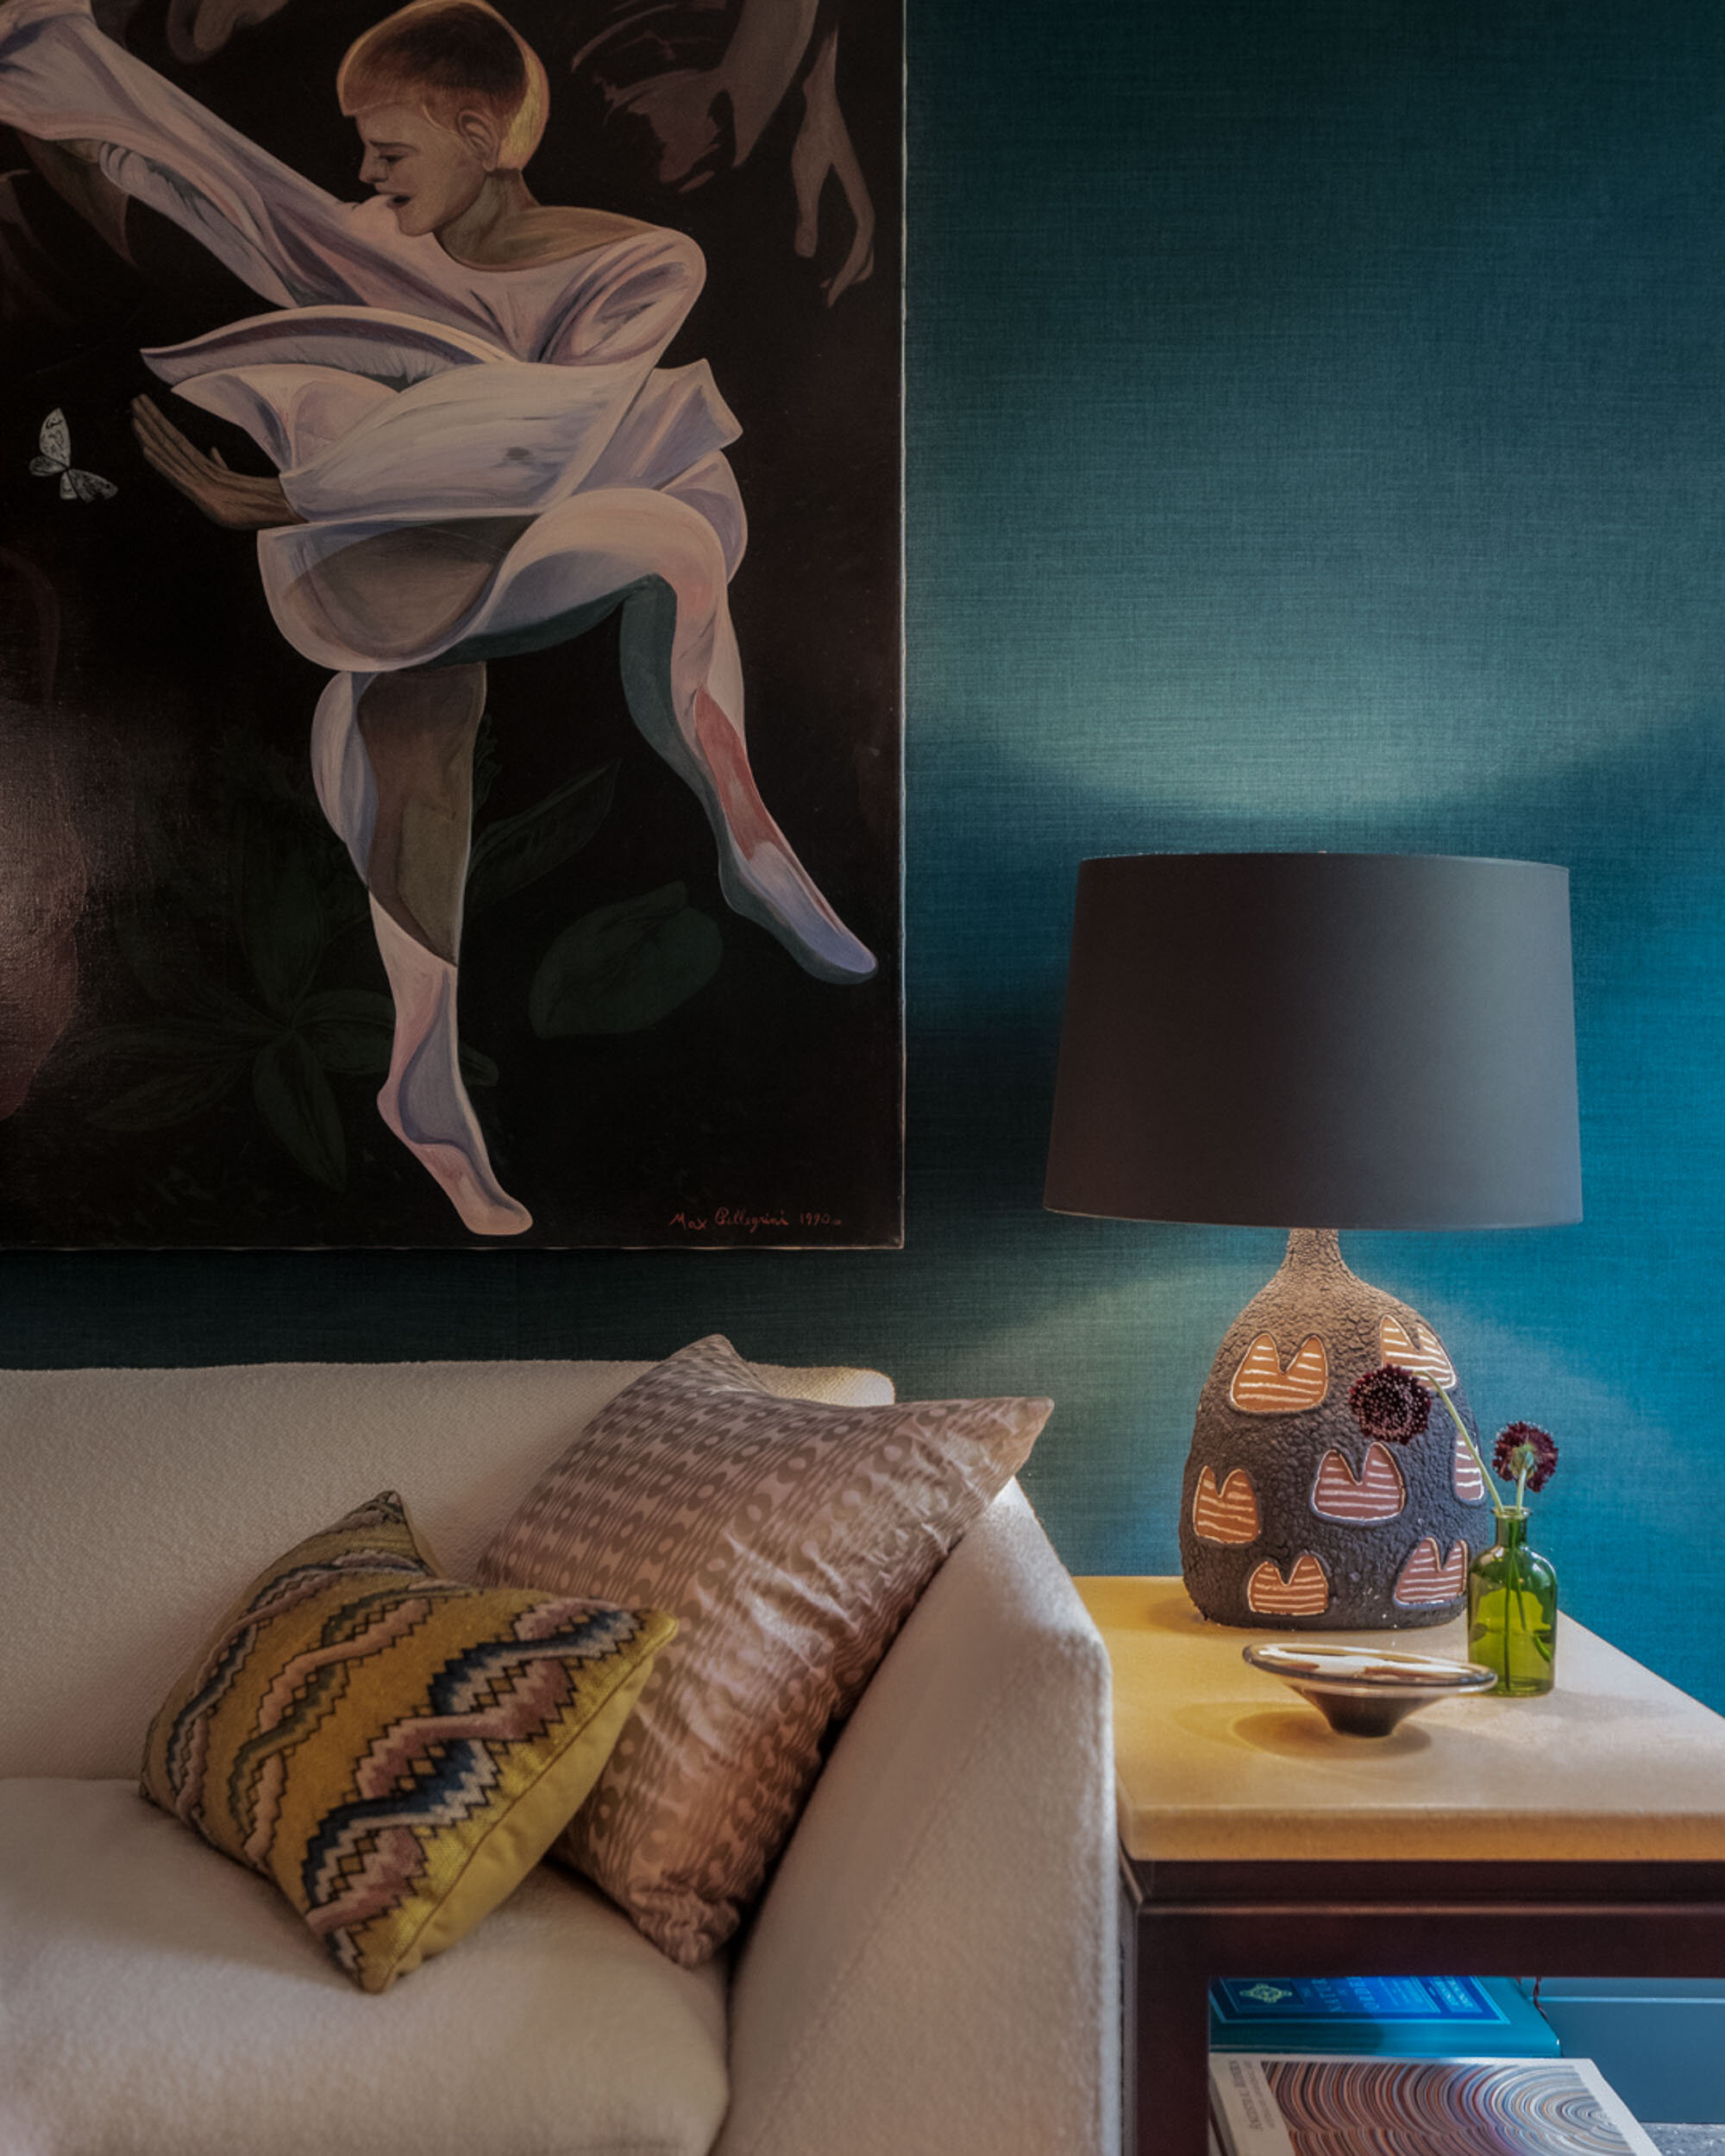  #bradsteinphoto, Highlights from the #kipsbayshowhouse19 Pappas Miron Design’s sitting room and bath, whose stylish furnishings and objects show off handcrafted materials and forms. Teal upholstery reaching not quite to the ceiling presents a vivid 